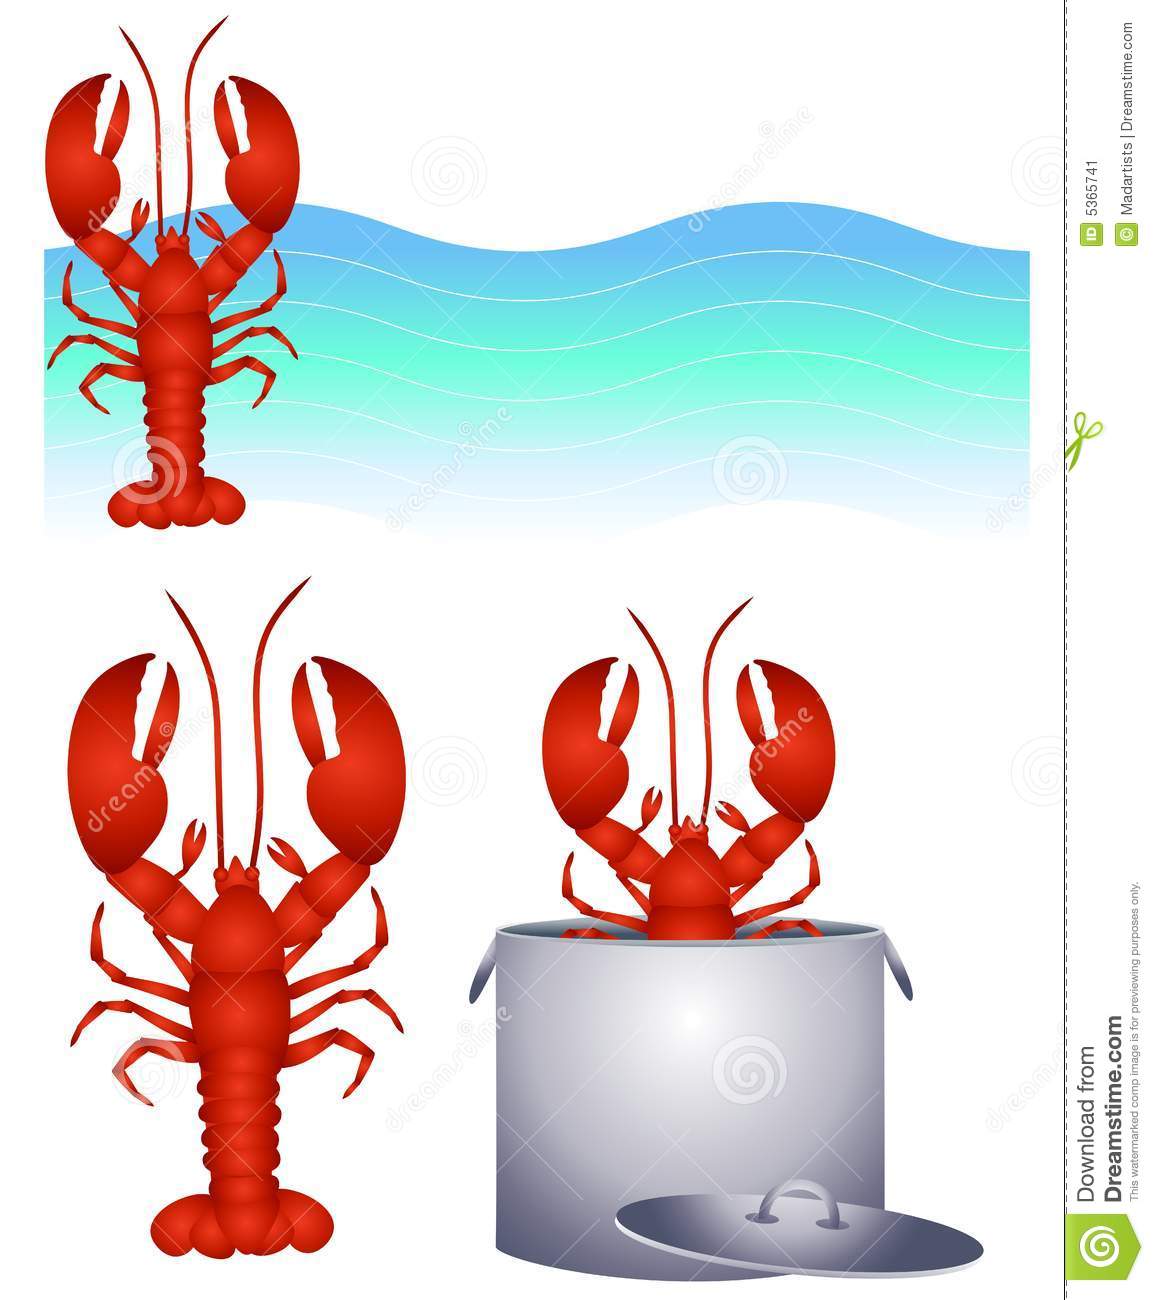 Red Lobster Clip Art And Logo Stock Image   Image  5365741